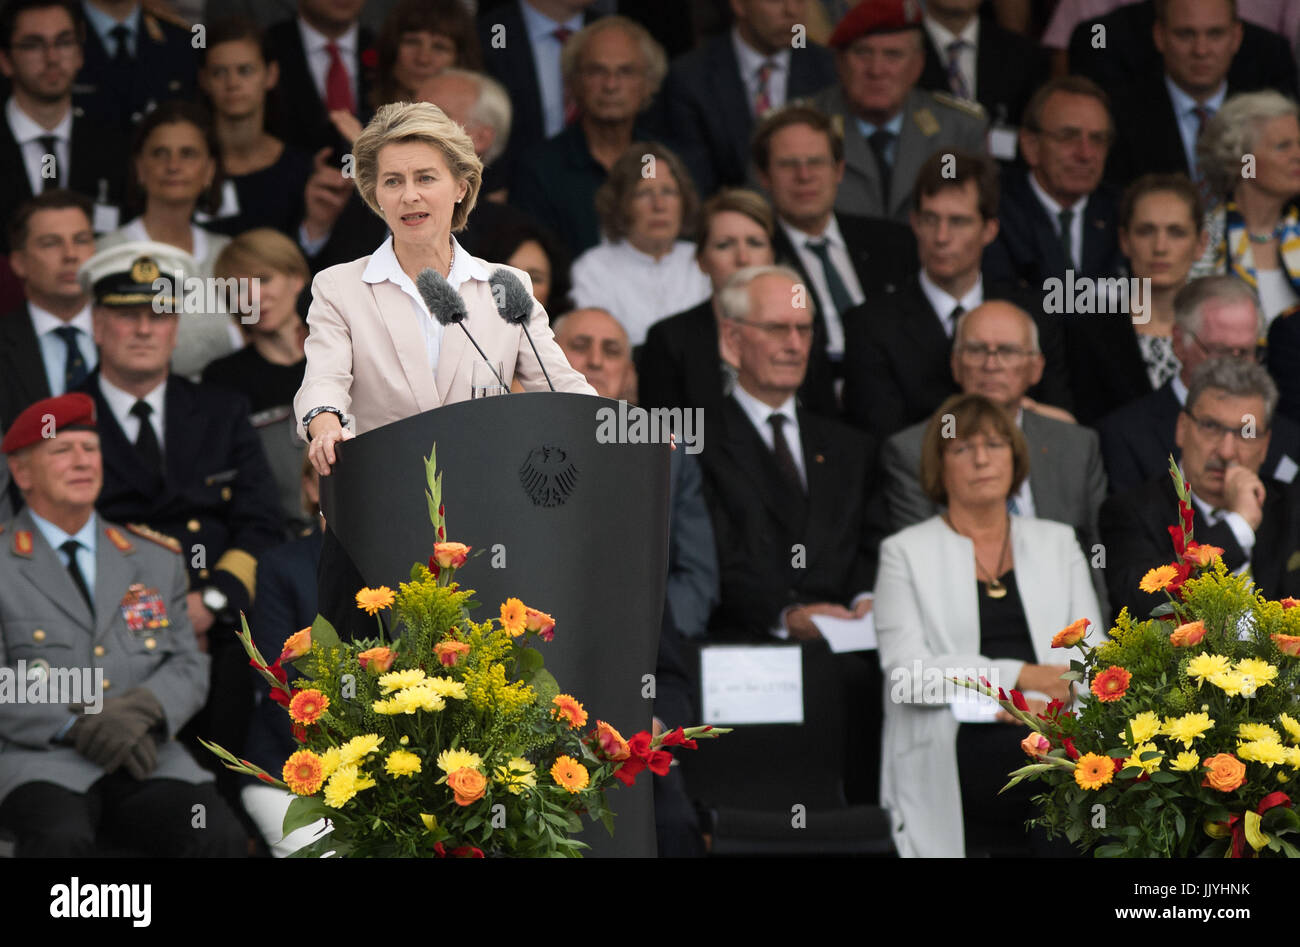 Berlin, Germany. 20th July, 2017. German Defence Minister Ursula von der Leyen (front L) addresses recruits during the swearing-in ceremony held on the Bendlerblock parade ground in Berlin, Germany, 20 July 2017. 400 recruits were sworn in during a ceremony on the 73rd anniversary of the 20 July plot, an attempt launched by a group of conspirators to assassinate Adolf Hitler, leader of Nazi Germany at that time. Photo: Soeren Stache/dpa/Alamy Live News Stock Photo